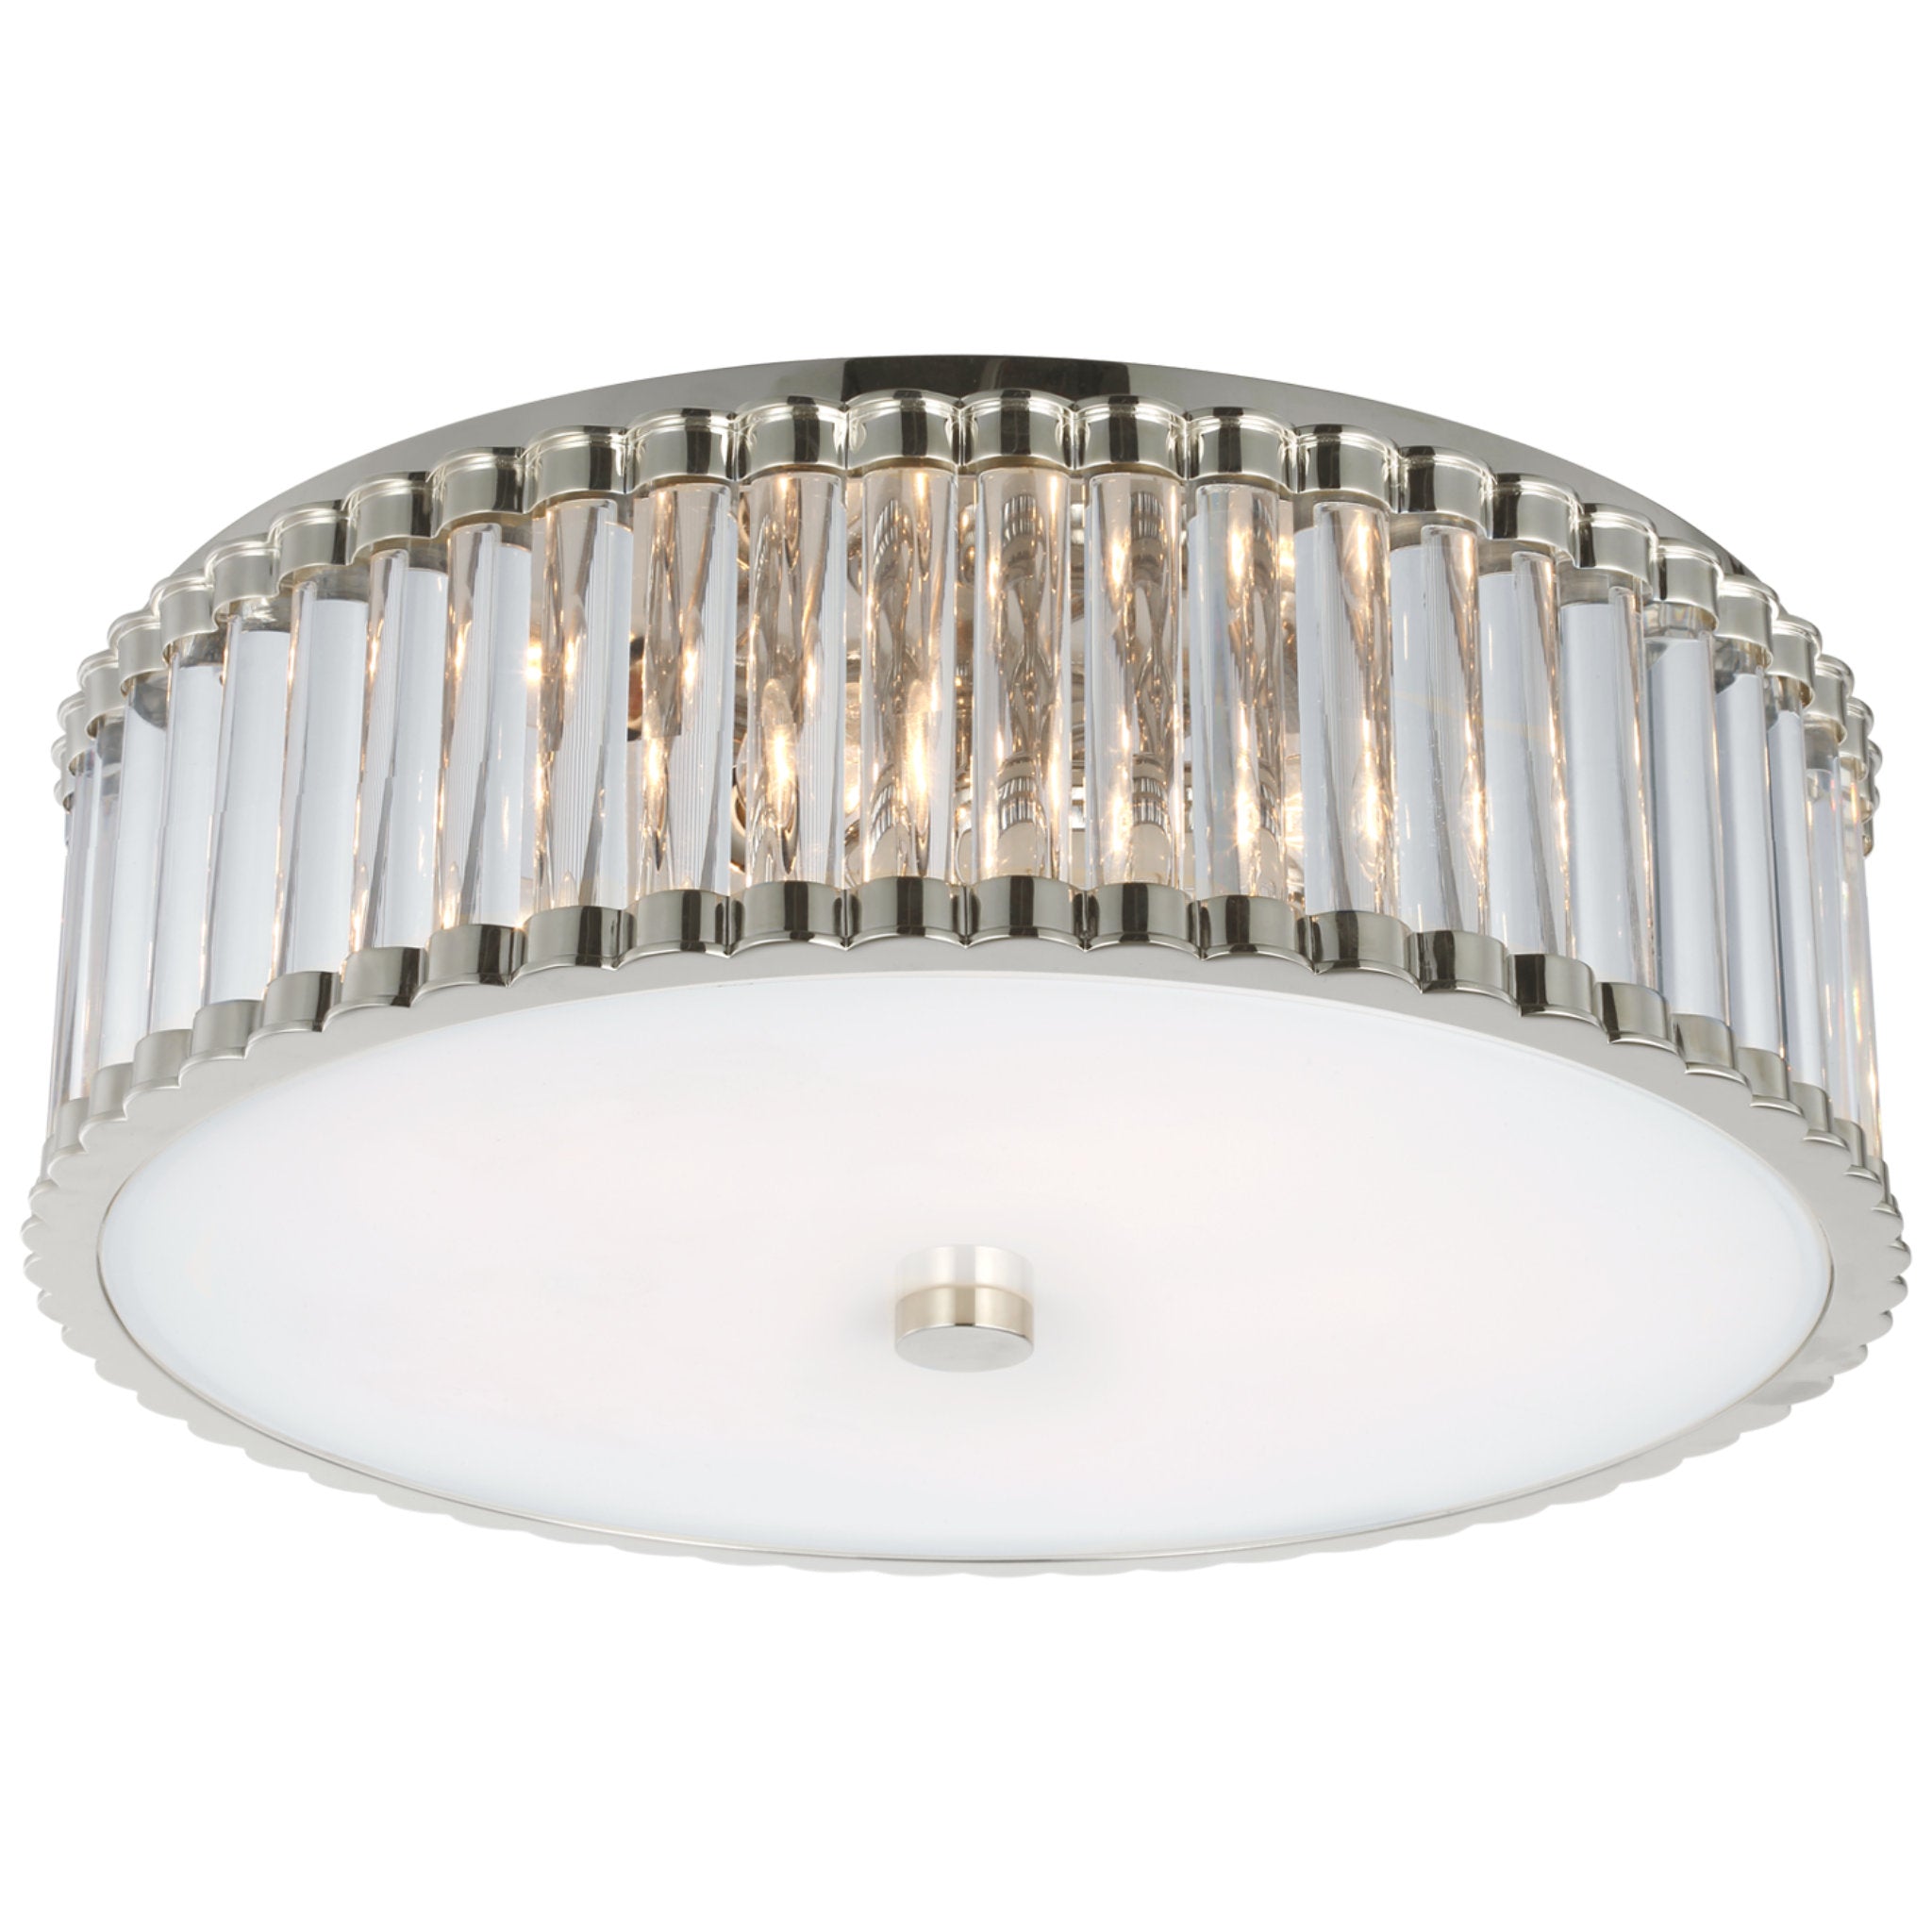 Chapman & Myers Kean 18" Flush Mount in Polished Nickel with Clear Glass Rods and Frosted Glass Diffuser